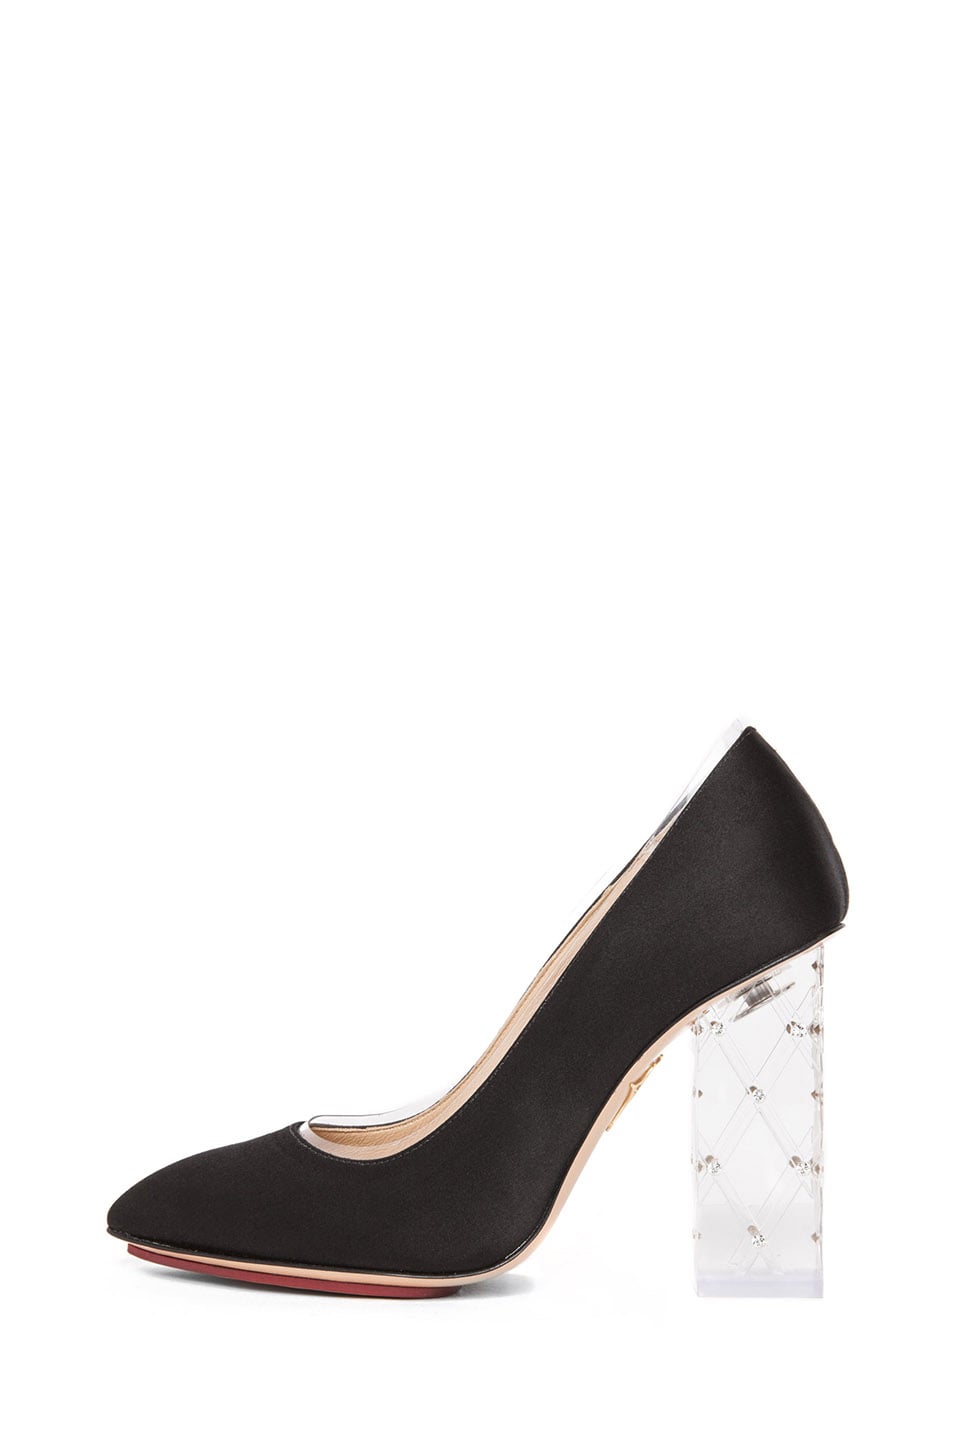 Image 1 of Charlotte Olympia Odette PVC and Crystal Heel Pump in Black